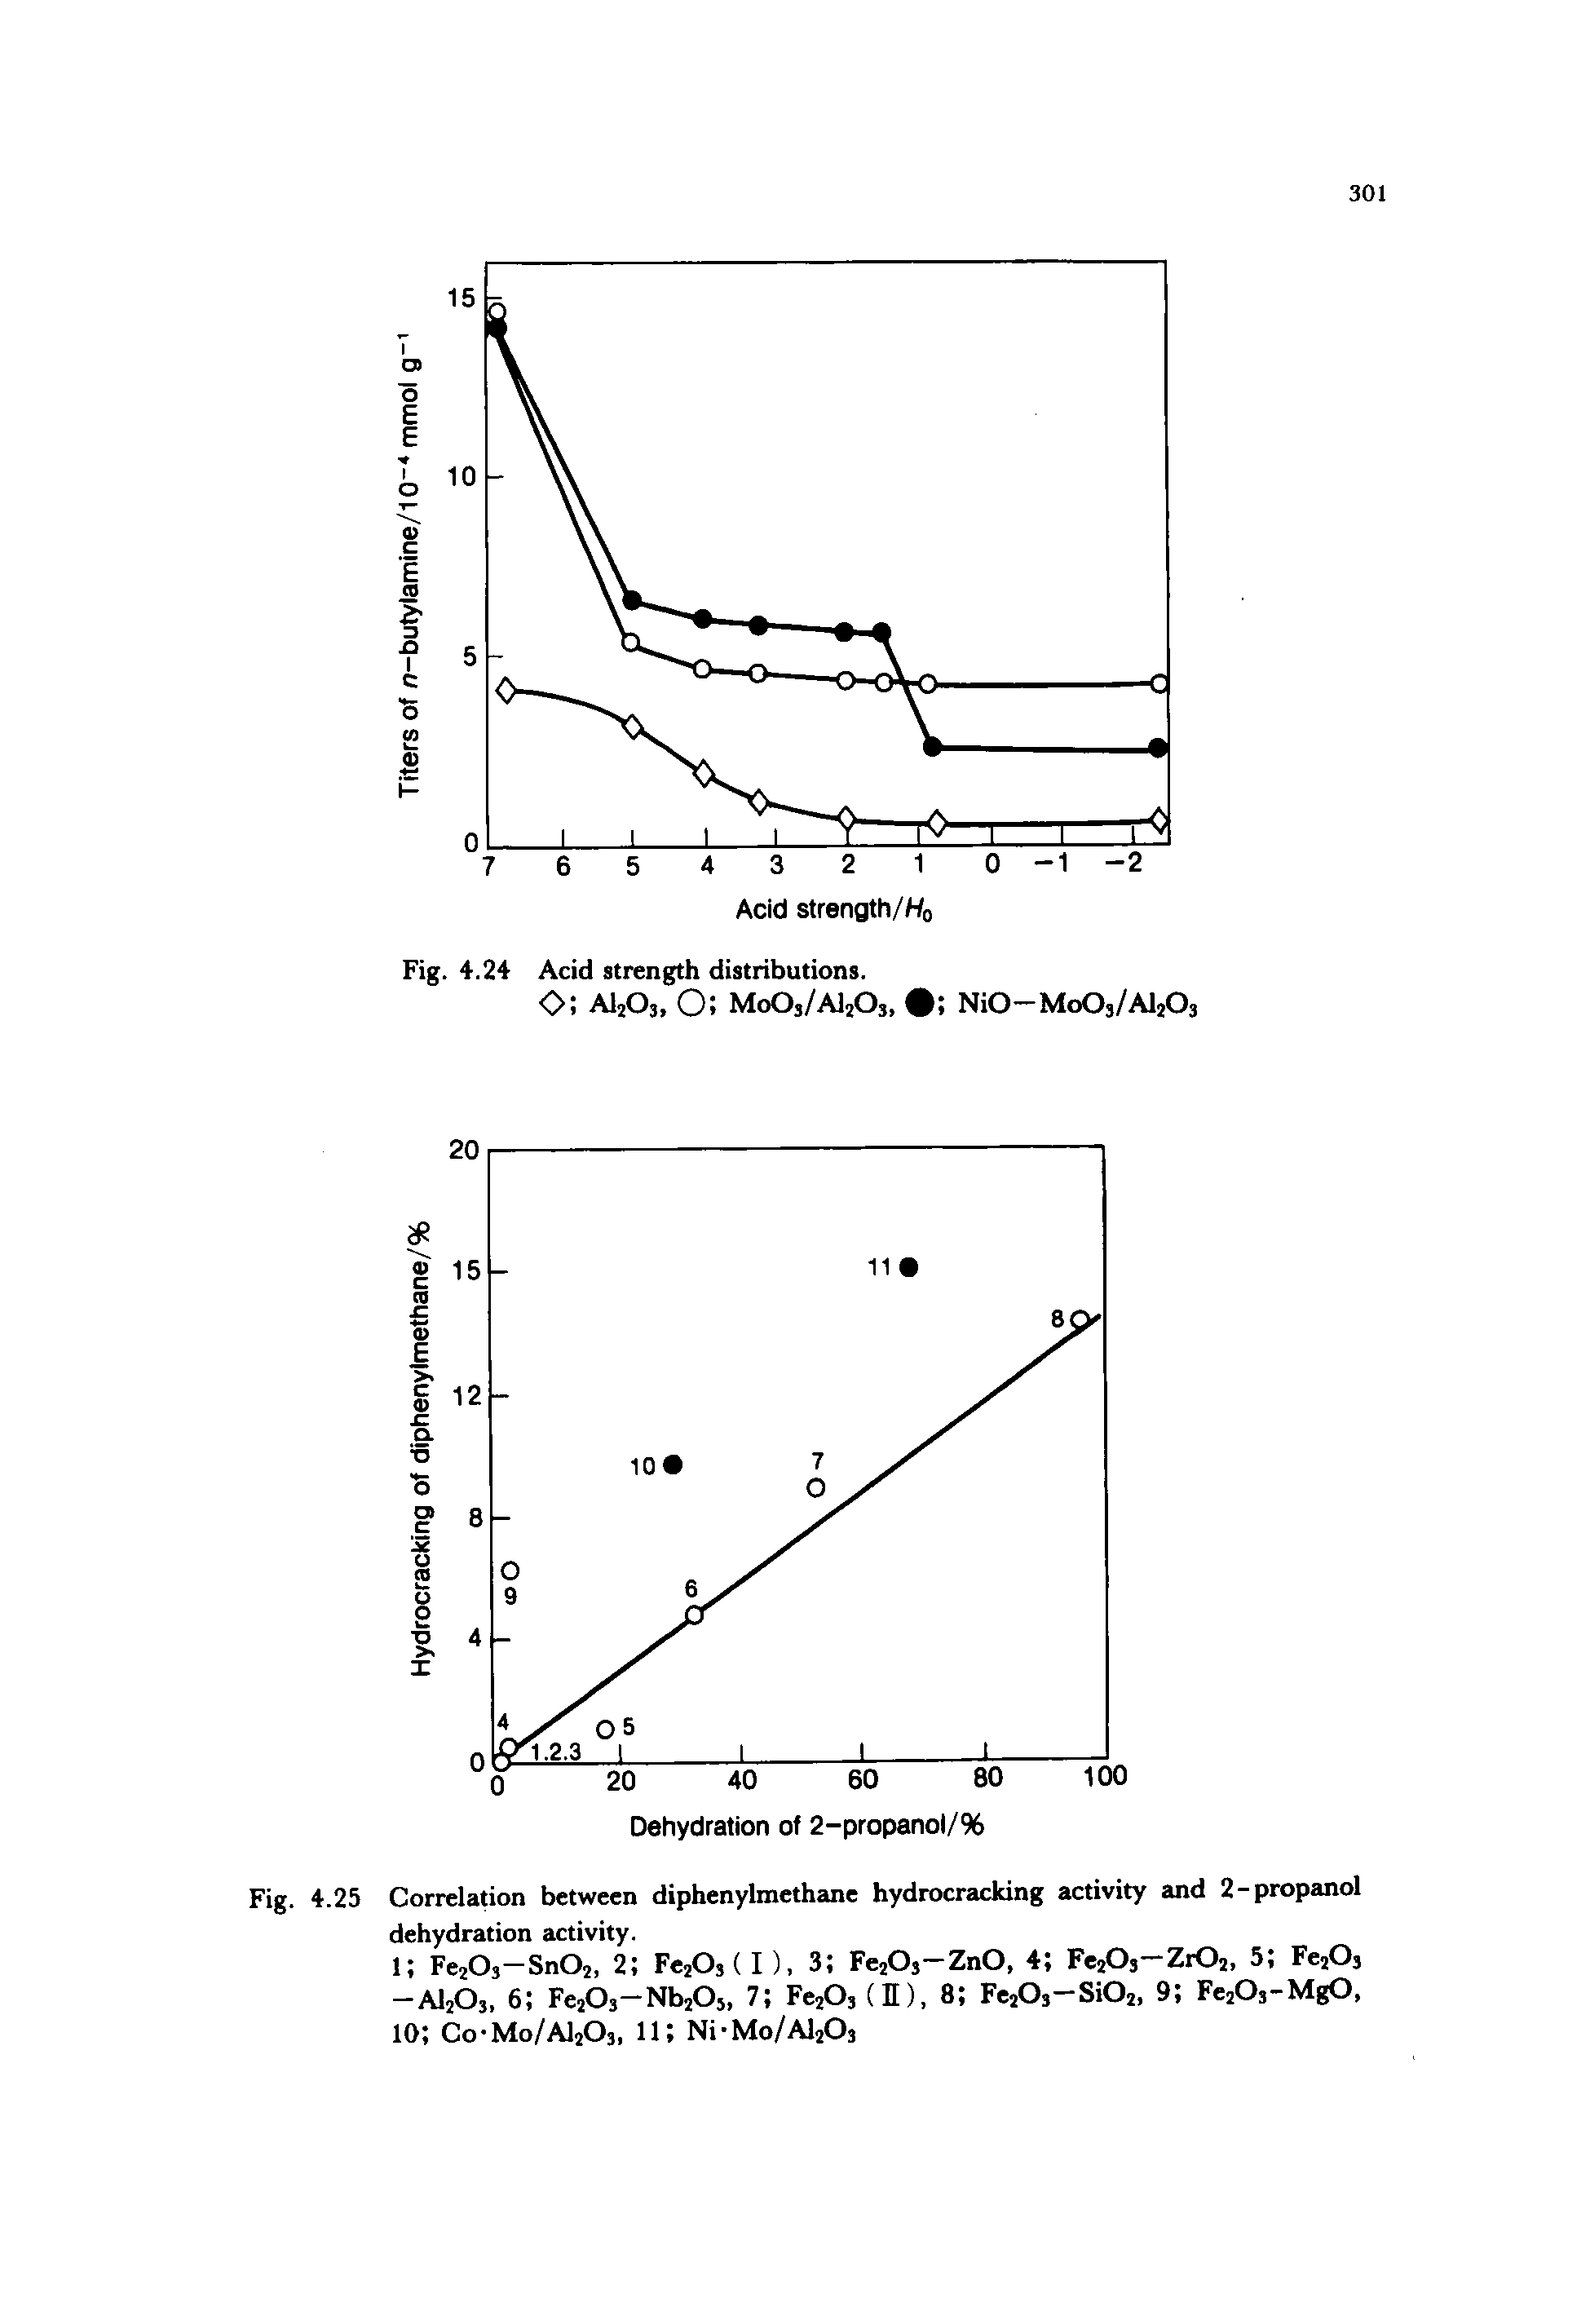 Fig. 4.25 Correlation between diphenylmethtuie hydrocracking activity and 2-propanol dehydration activity.